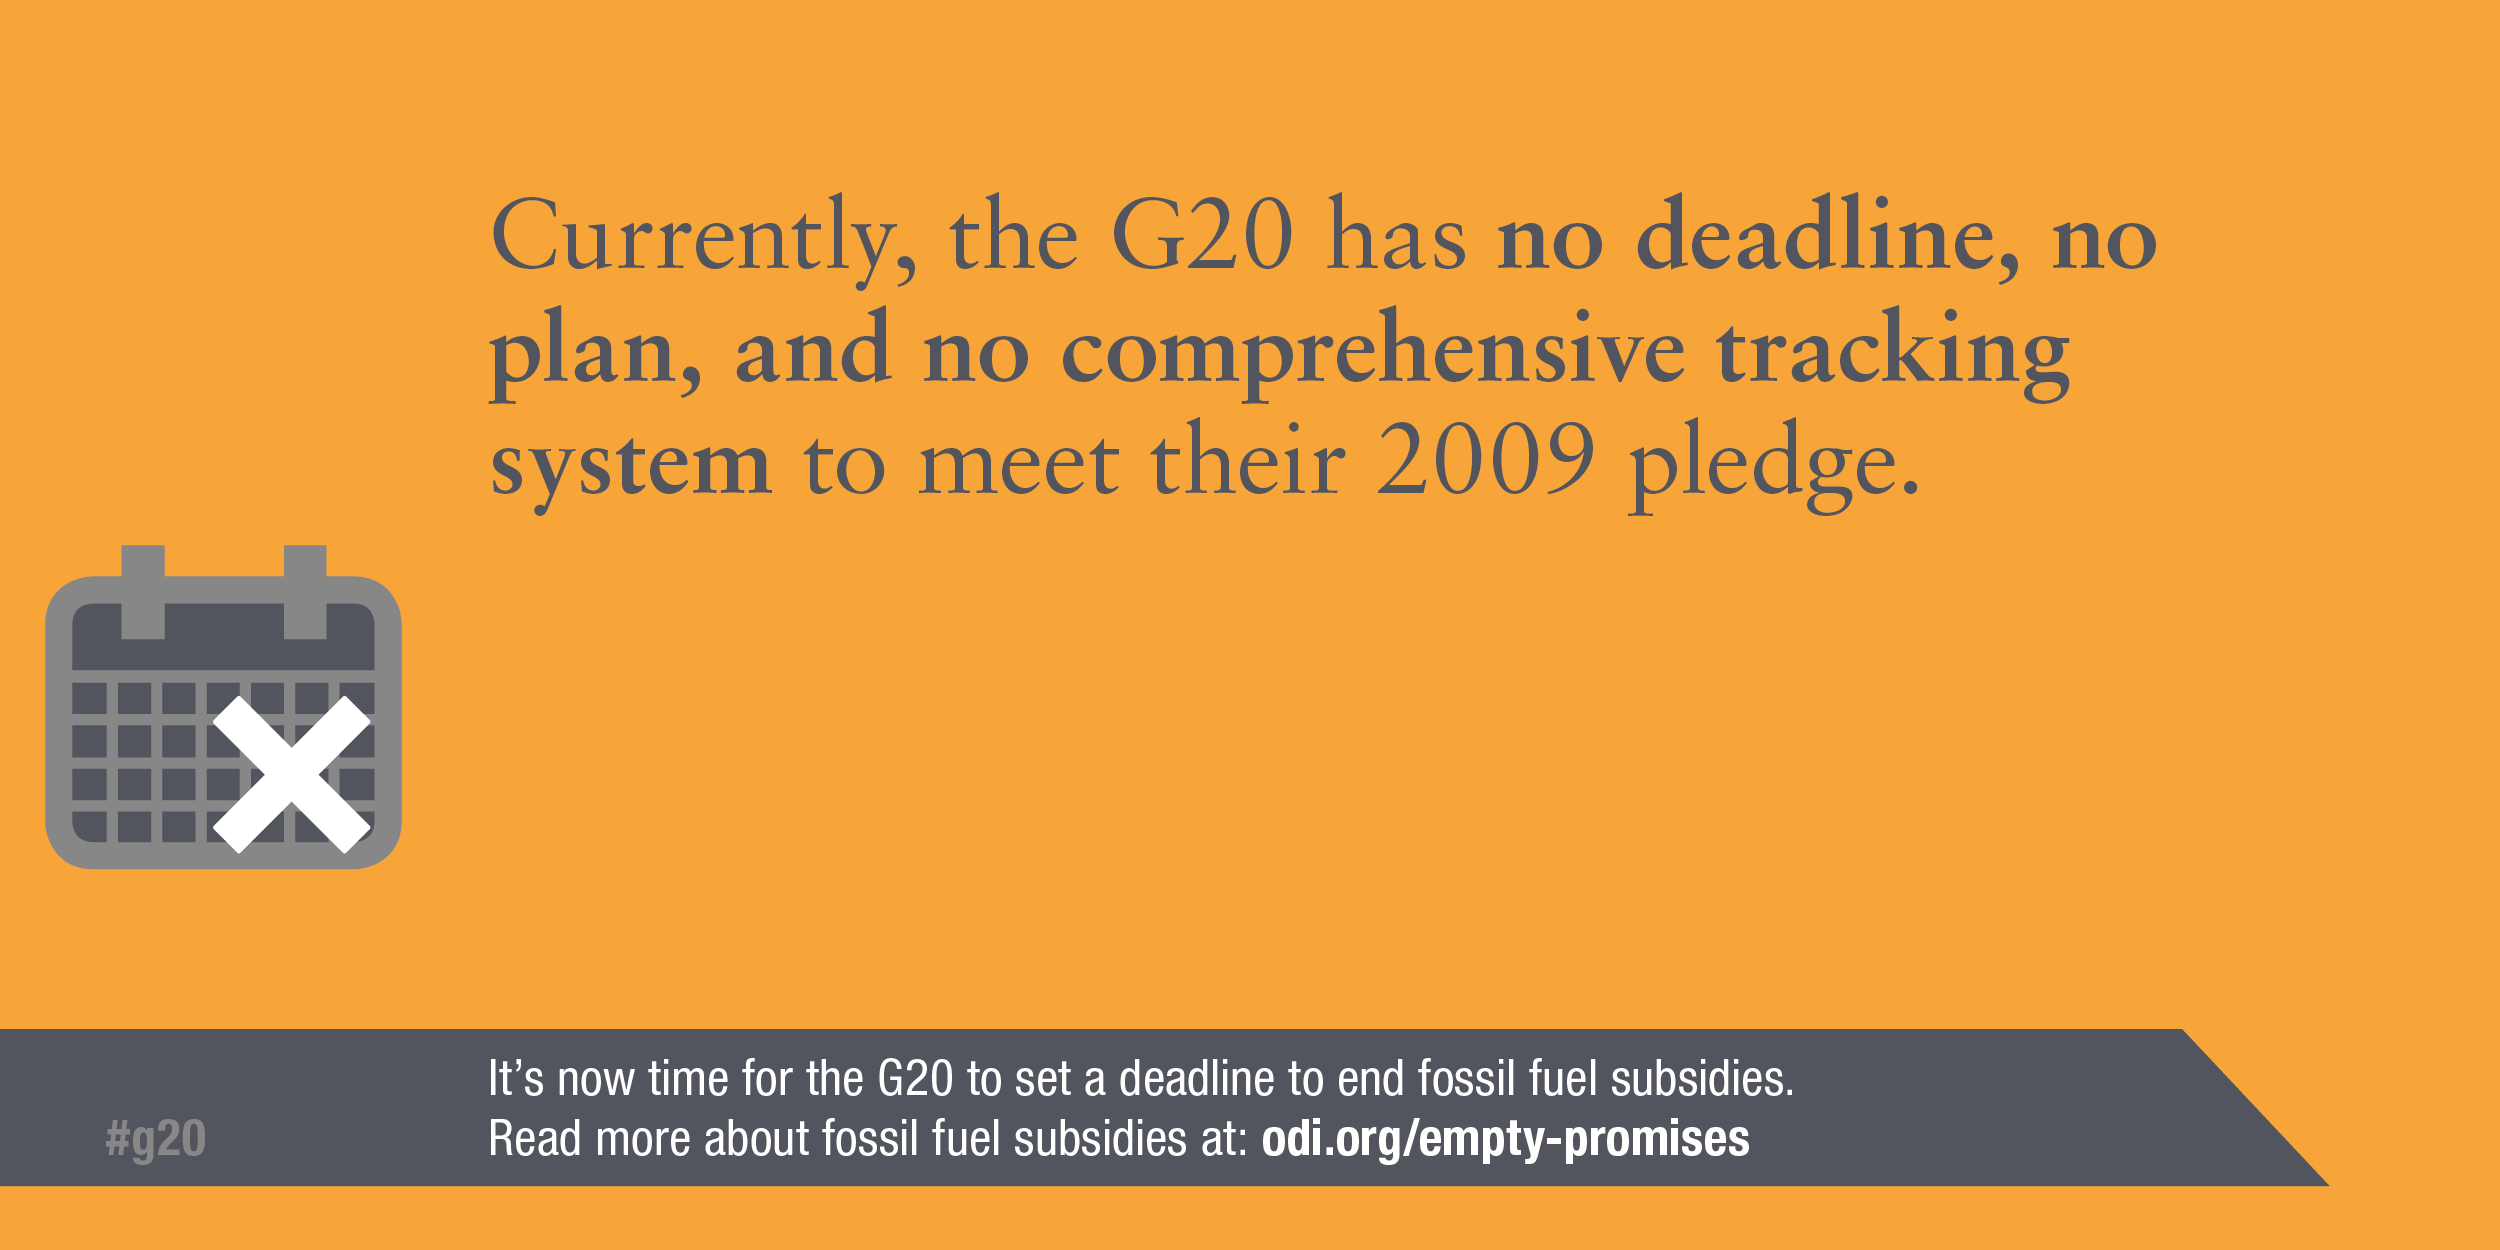 Infographic: Currently the G20 has no plan, deadline, or tracking system to meet their 2009 pledge